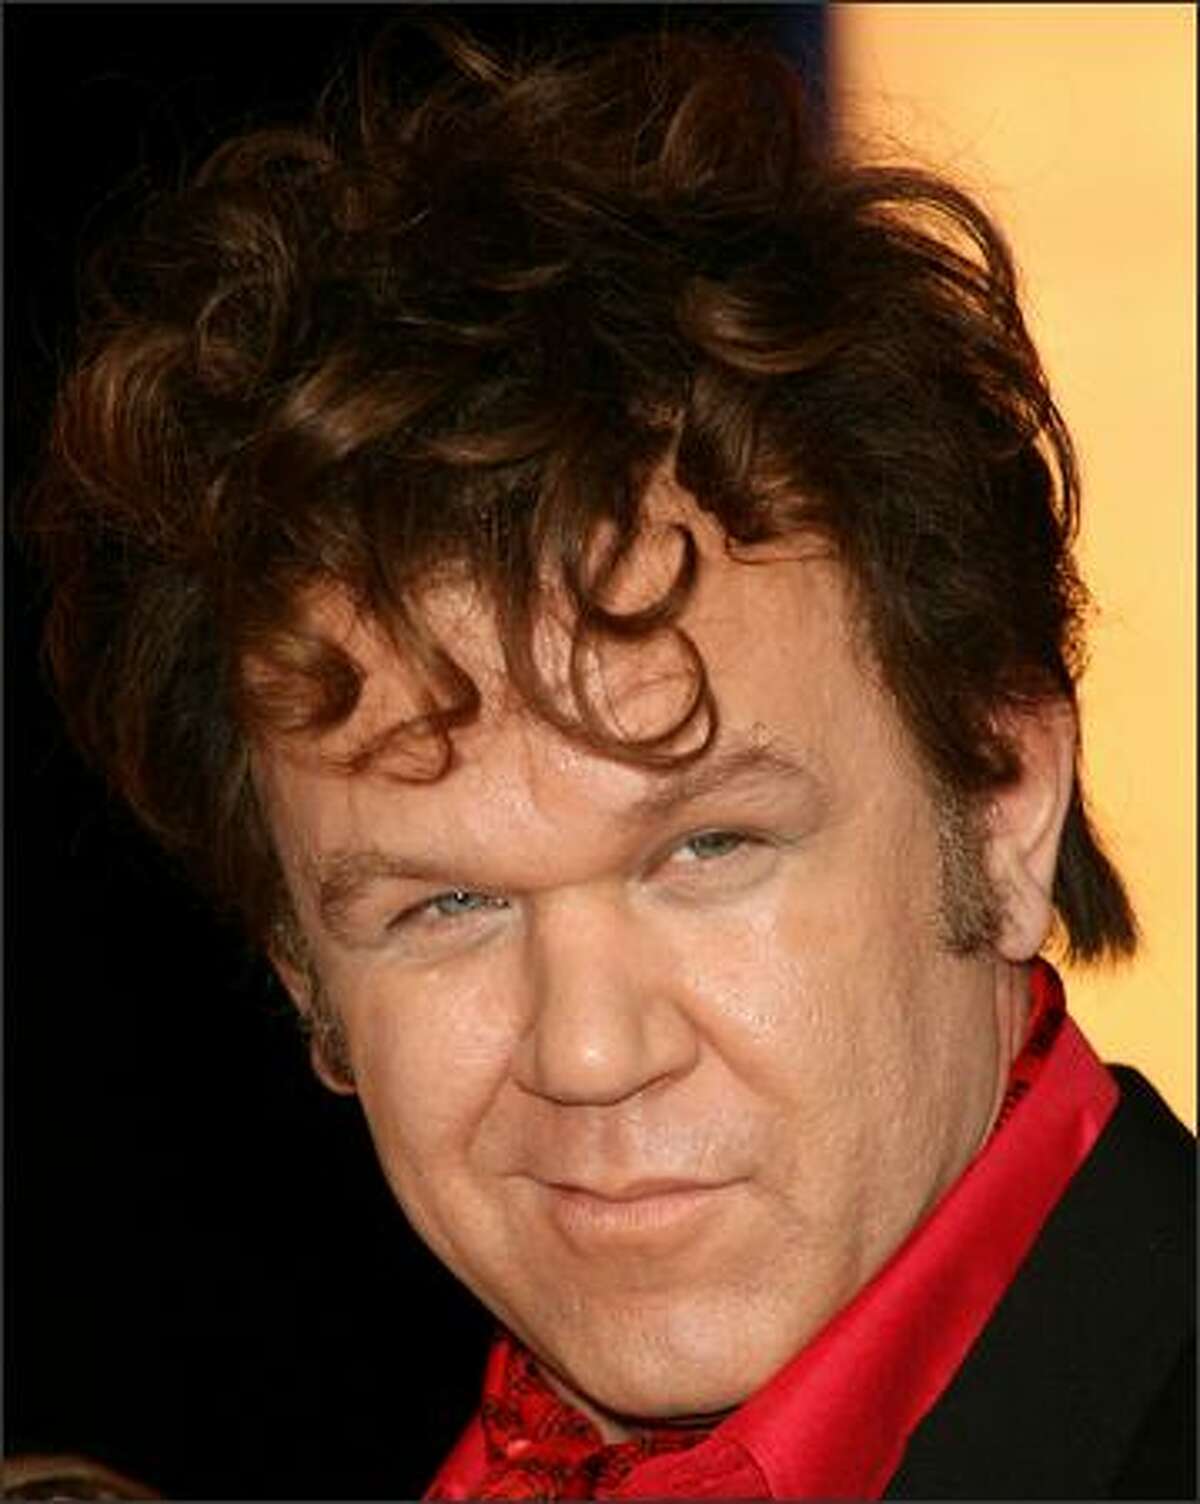 Actor John C. Reilly attends the "Walk Hard: The Dewey Cox Story" film premiere at Grauman's Chinese Theatre on Wednesday in Hollywood, Calif.